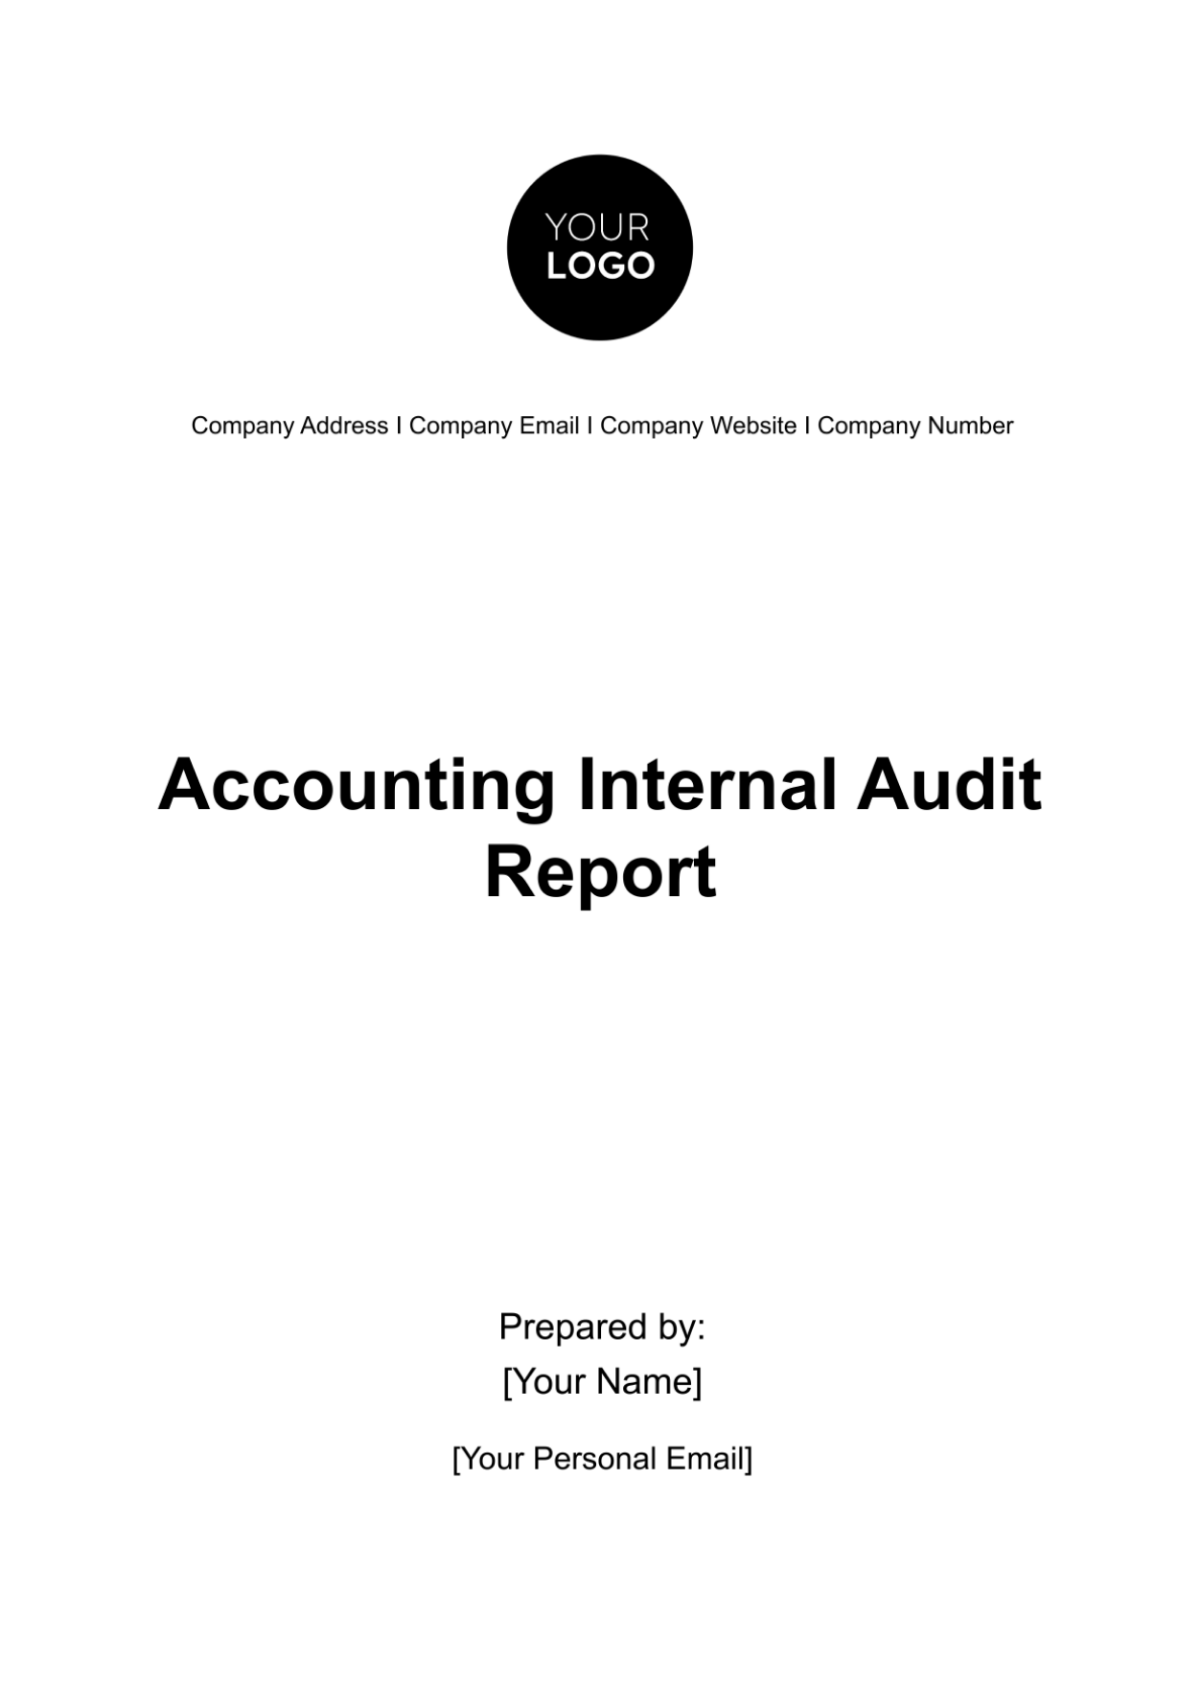 Accounting Internal Audit Report Template